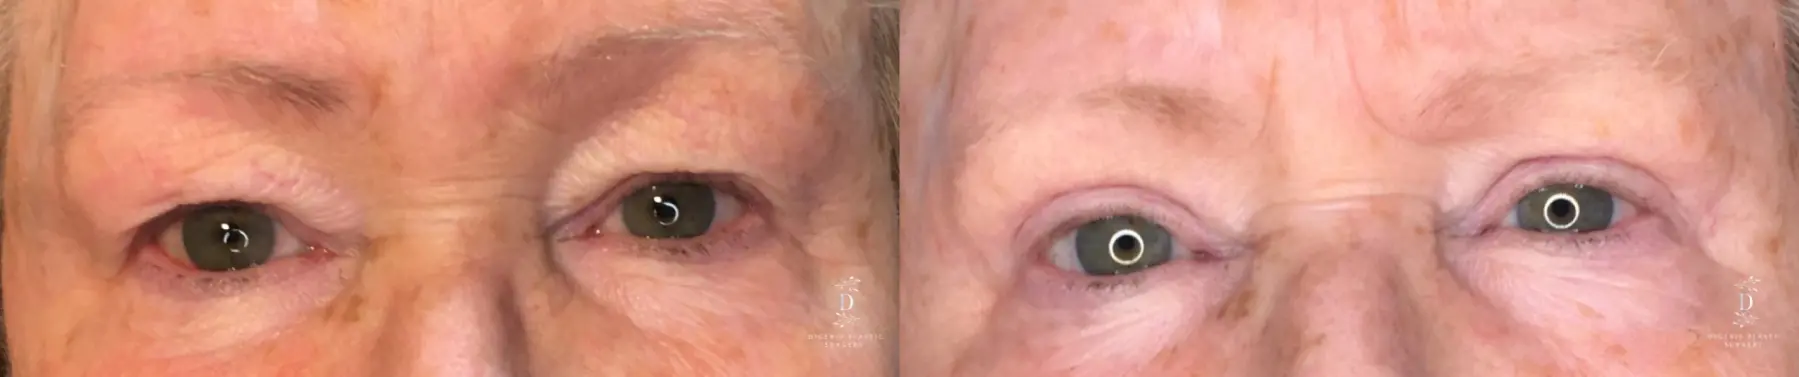 Eyelid Surgery: Patient 25 - Before and After 1